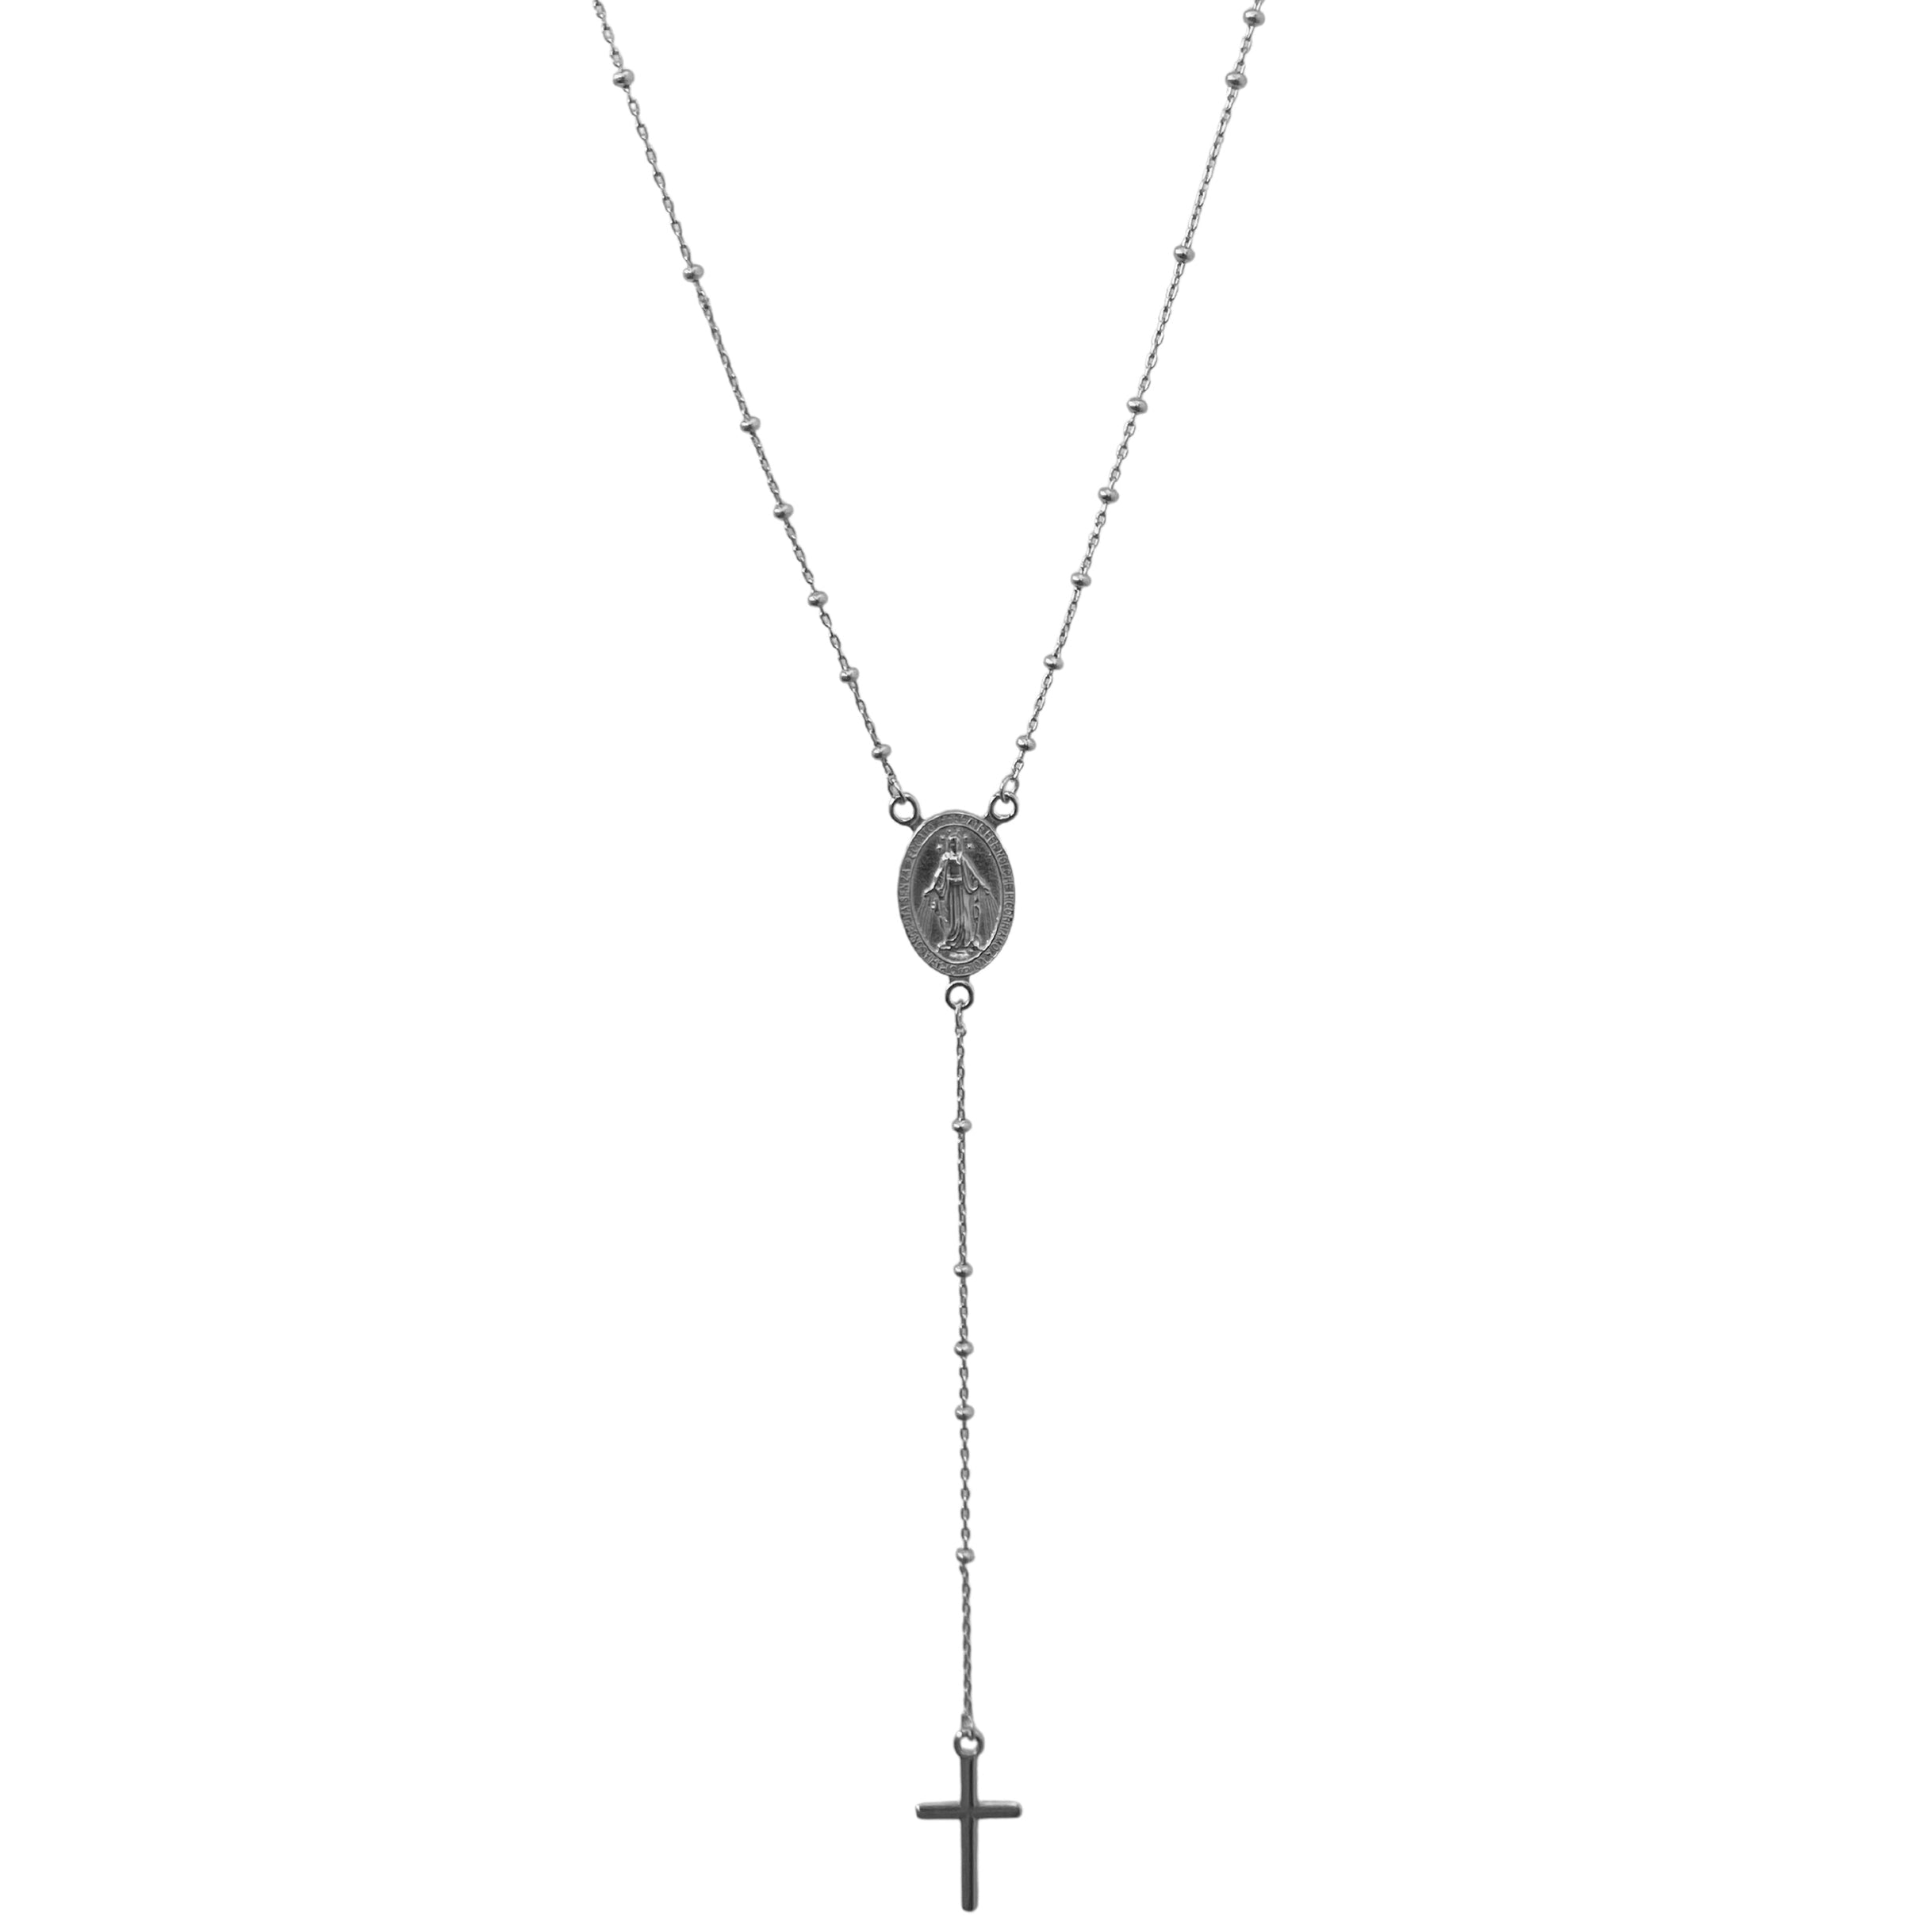 The Rosary Necklace TGU